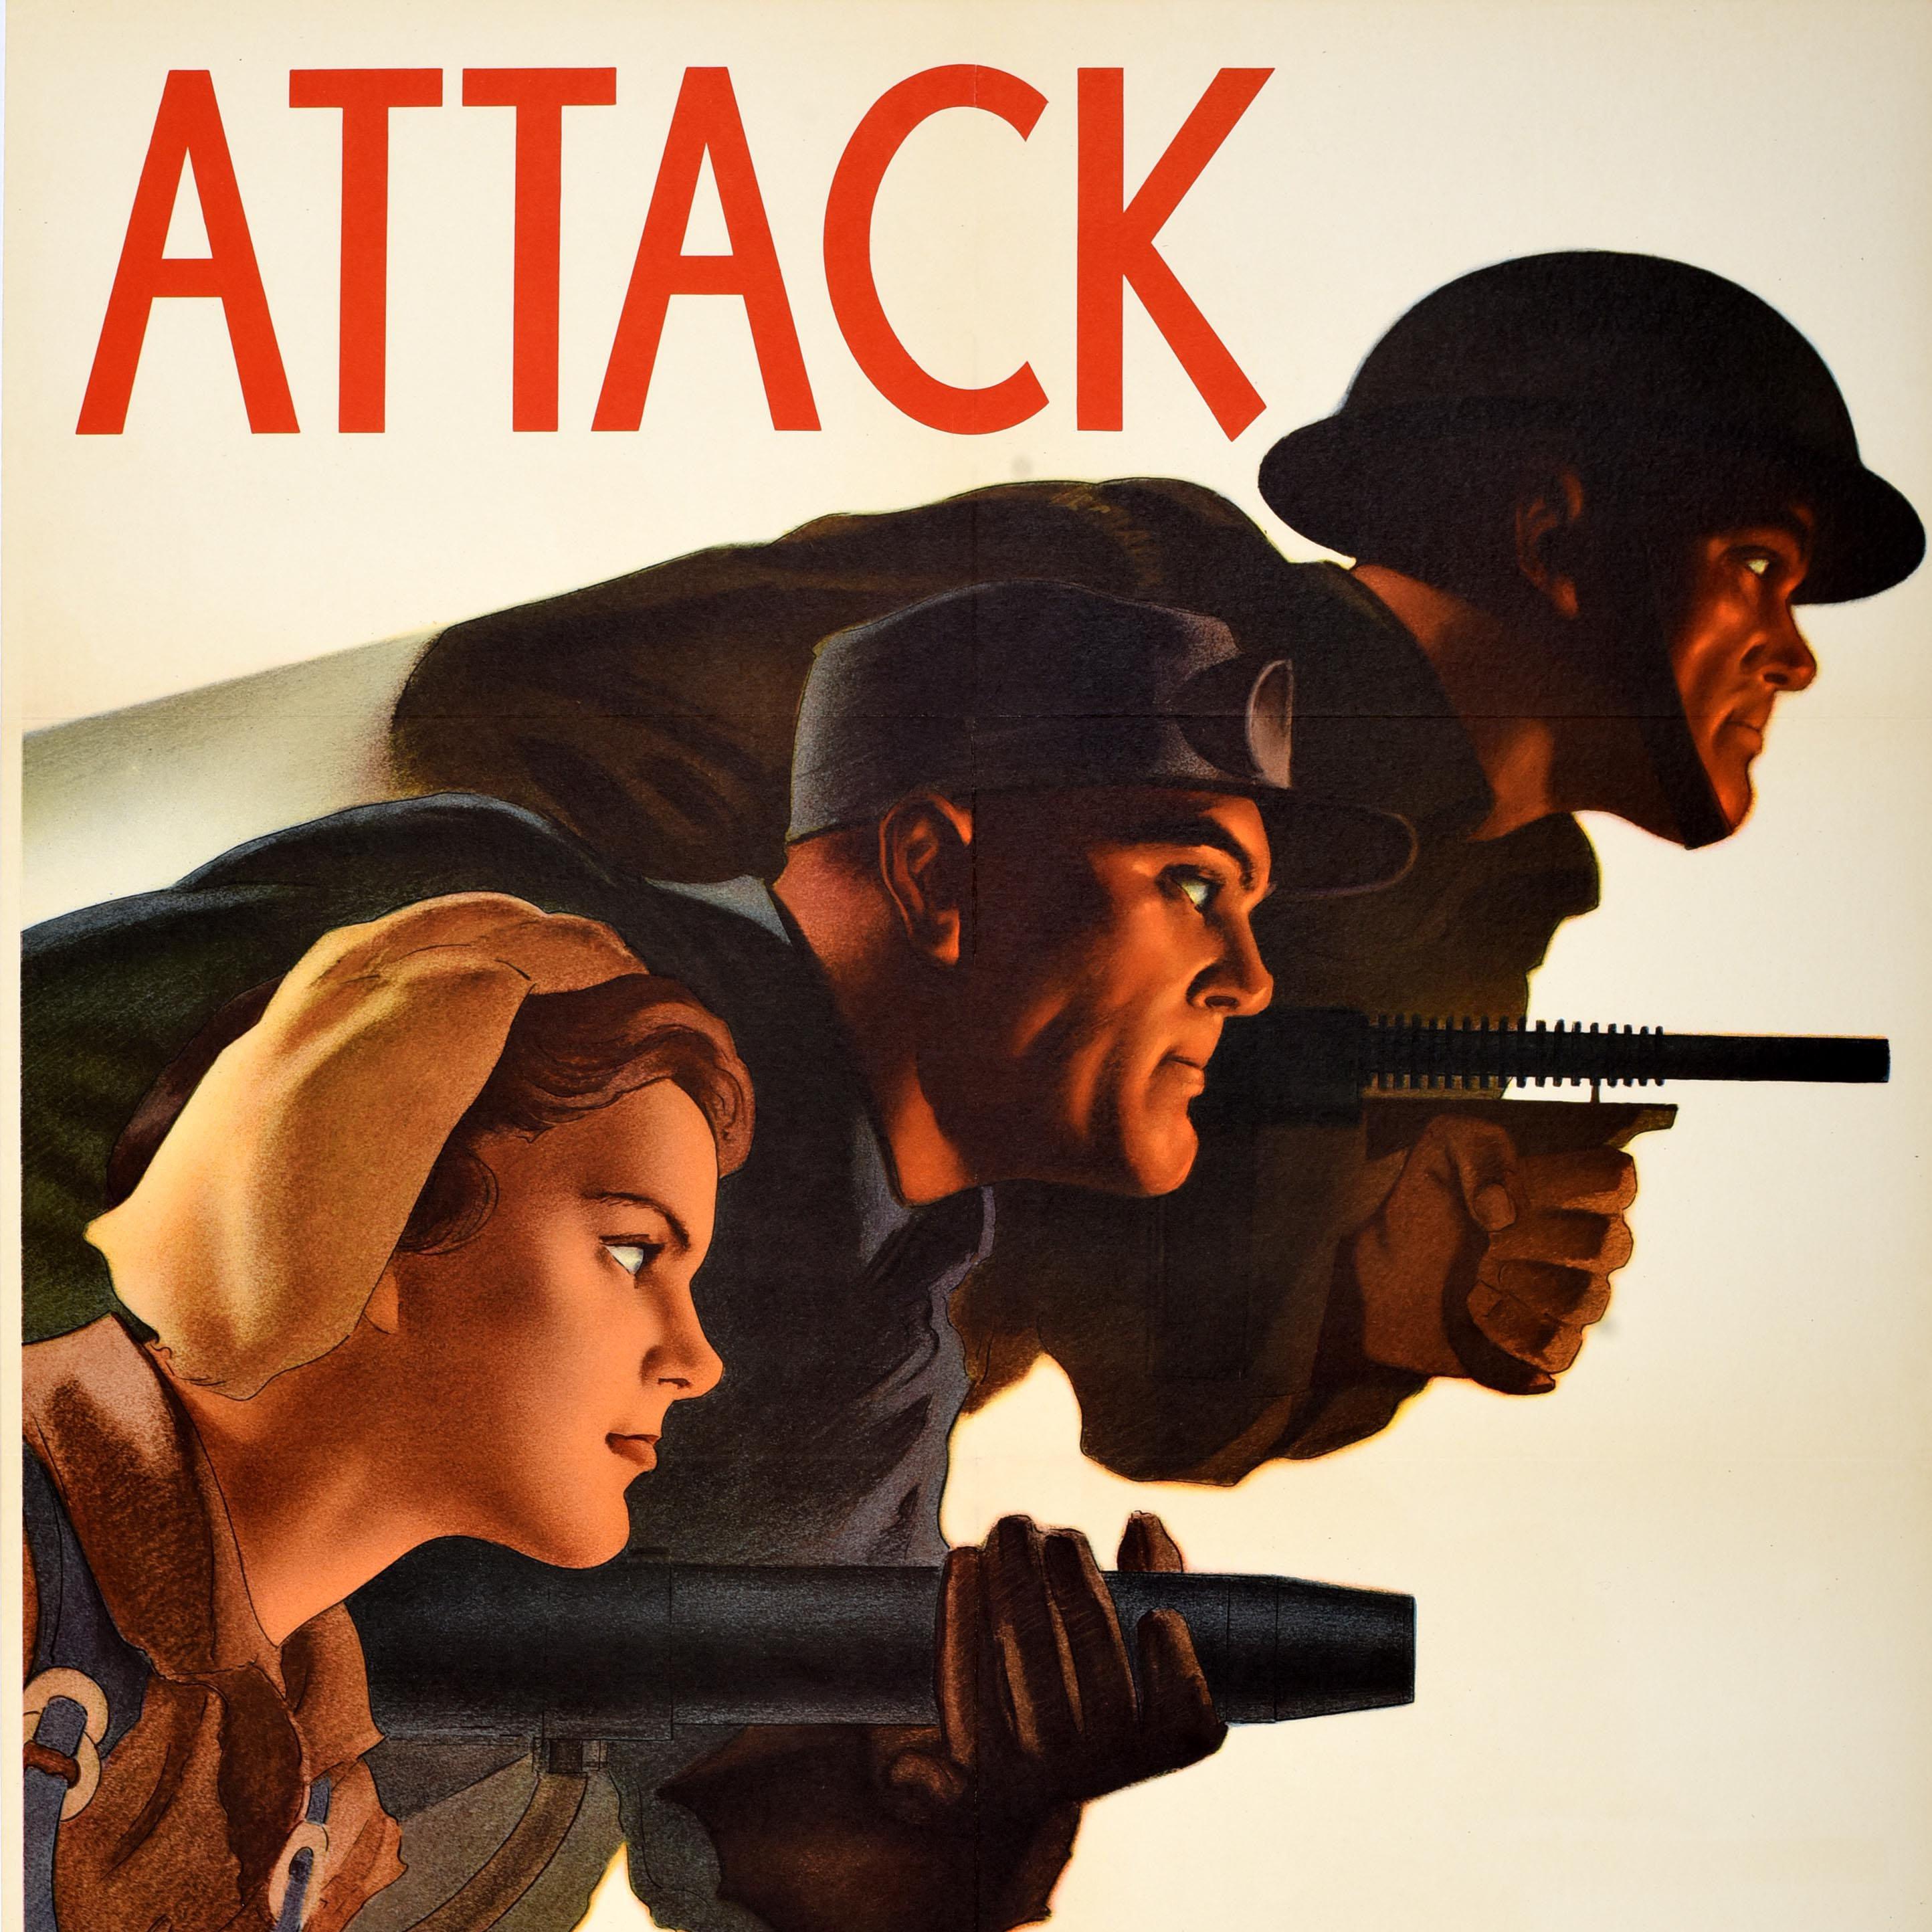 attack on all fronts poster meaning